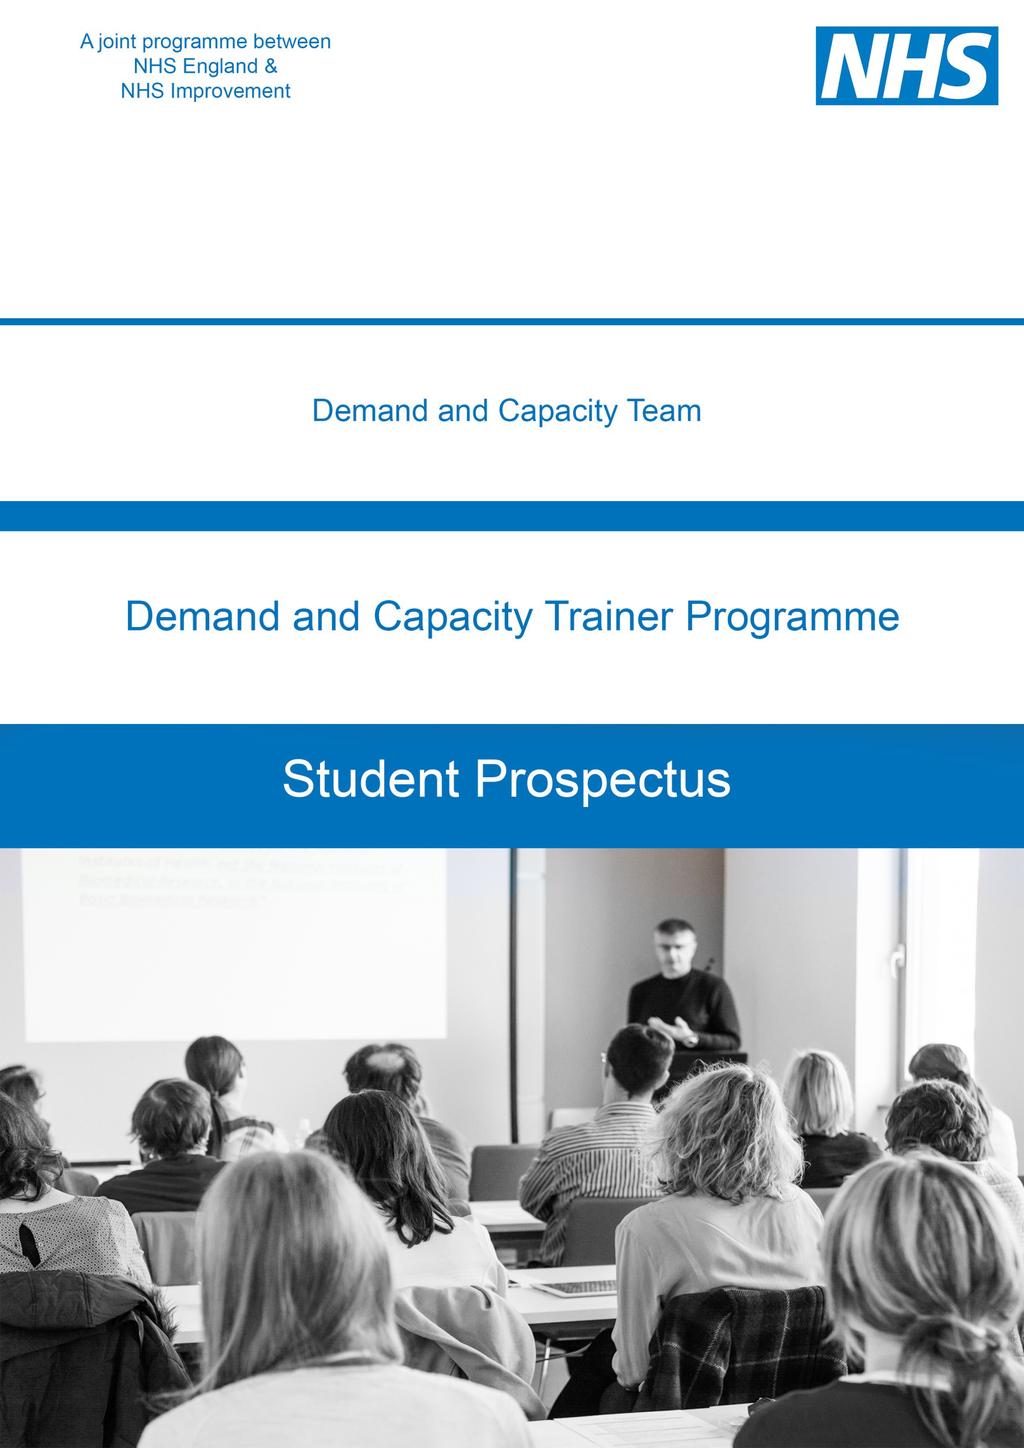 This is a joint programme between Demand and Capacity Trainer Programme Student Prospectus NHS